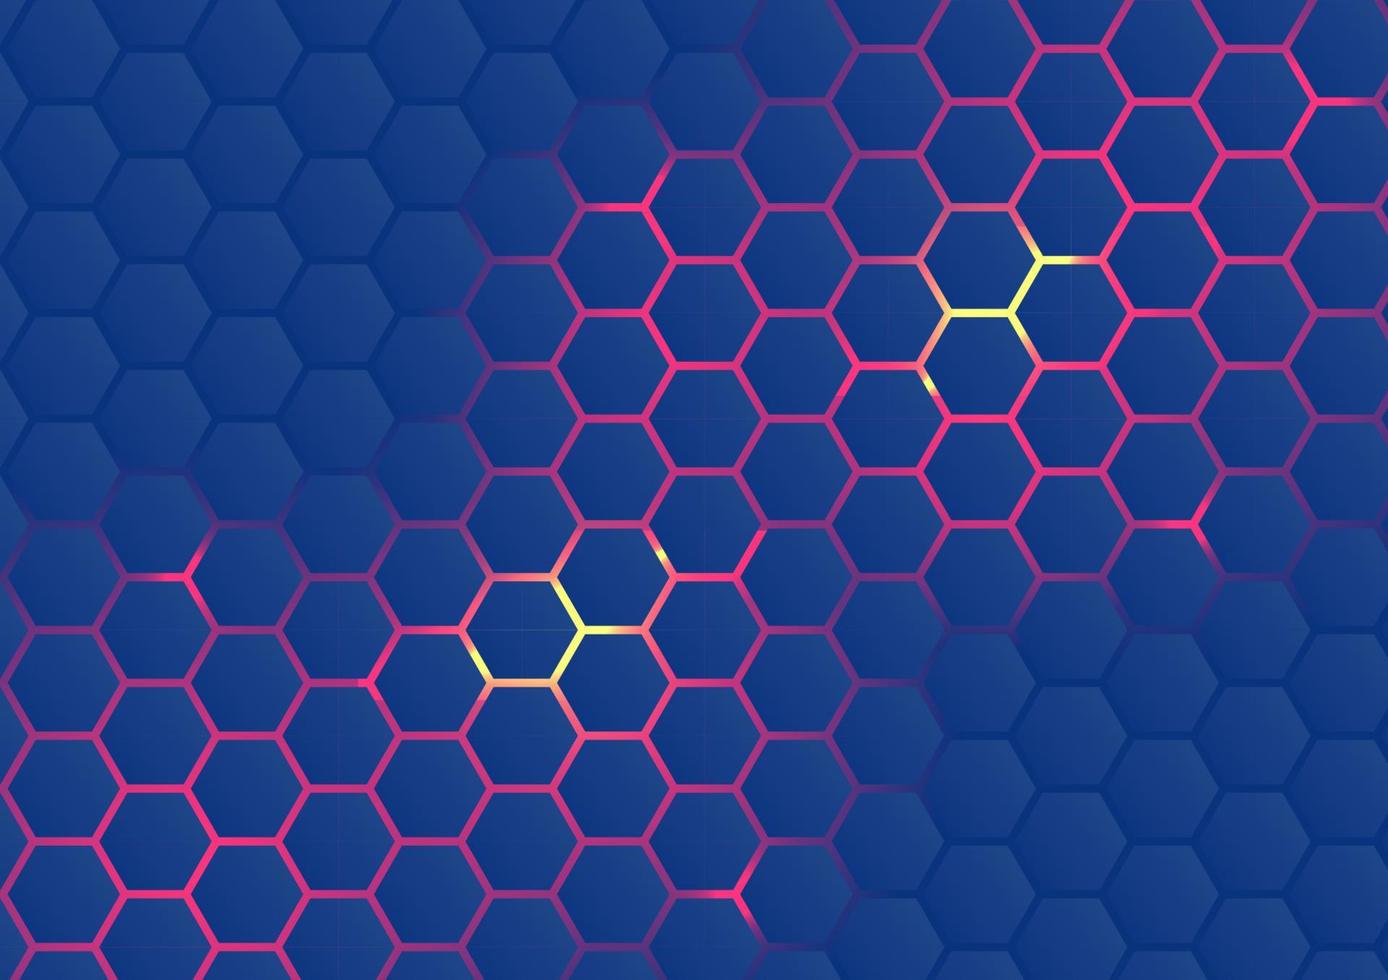 Modern technology abstract vector background in bee honeycombs or hive cells. Red and yellow hexagonal shape on blue background.